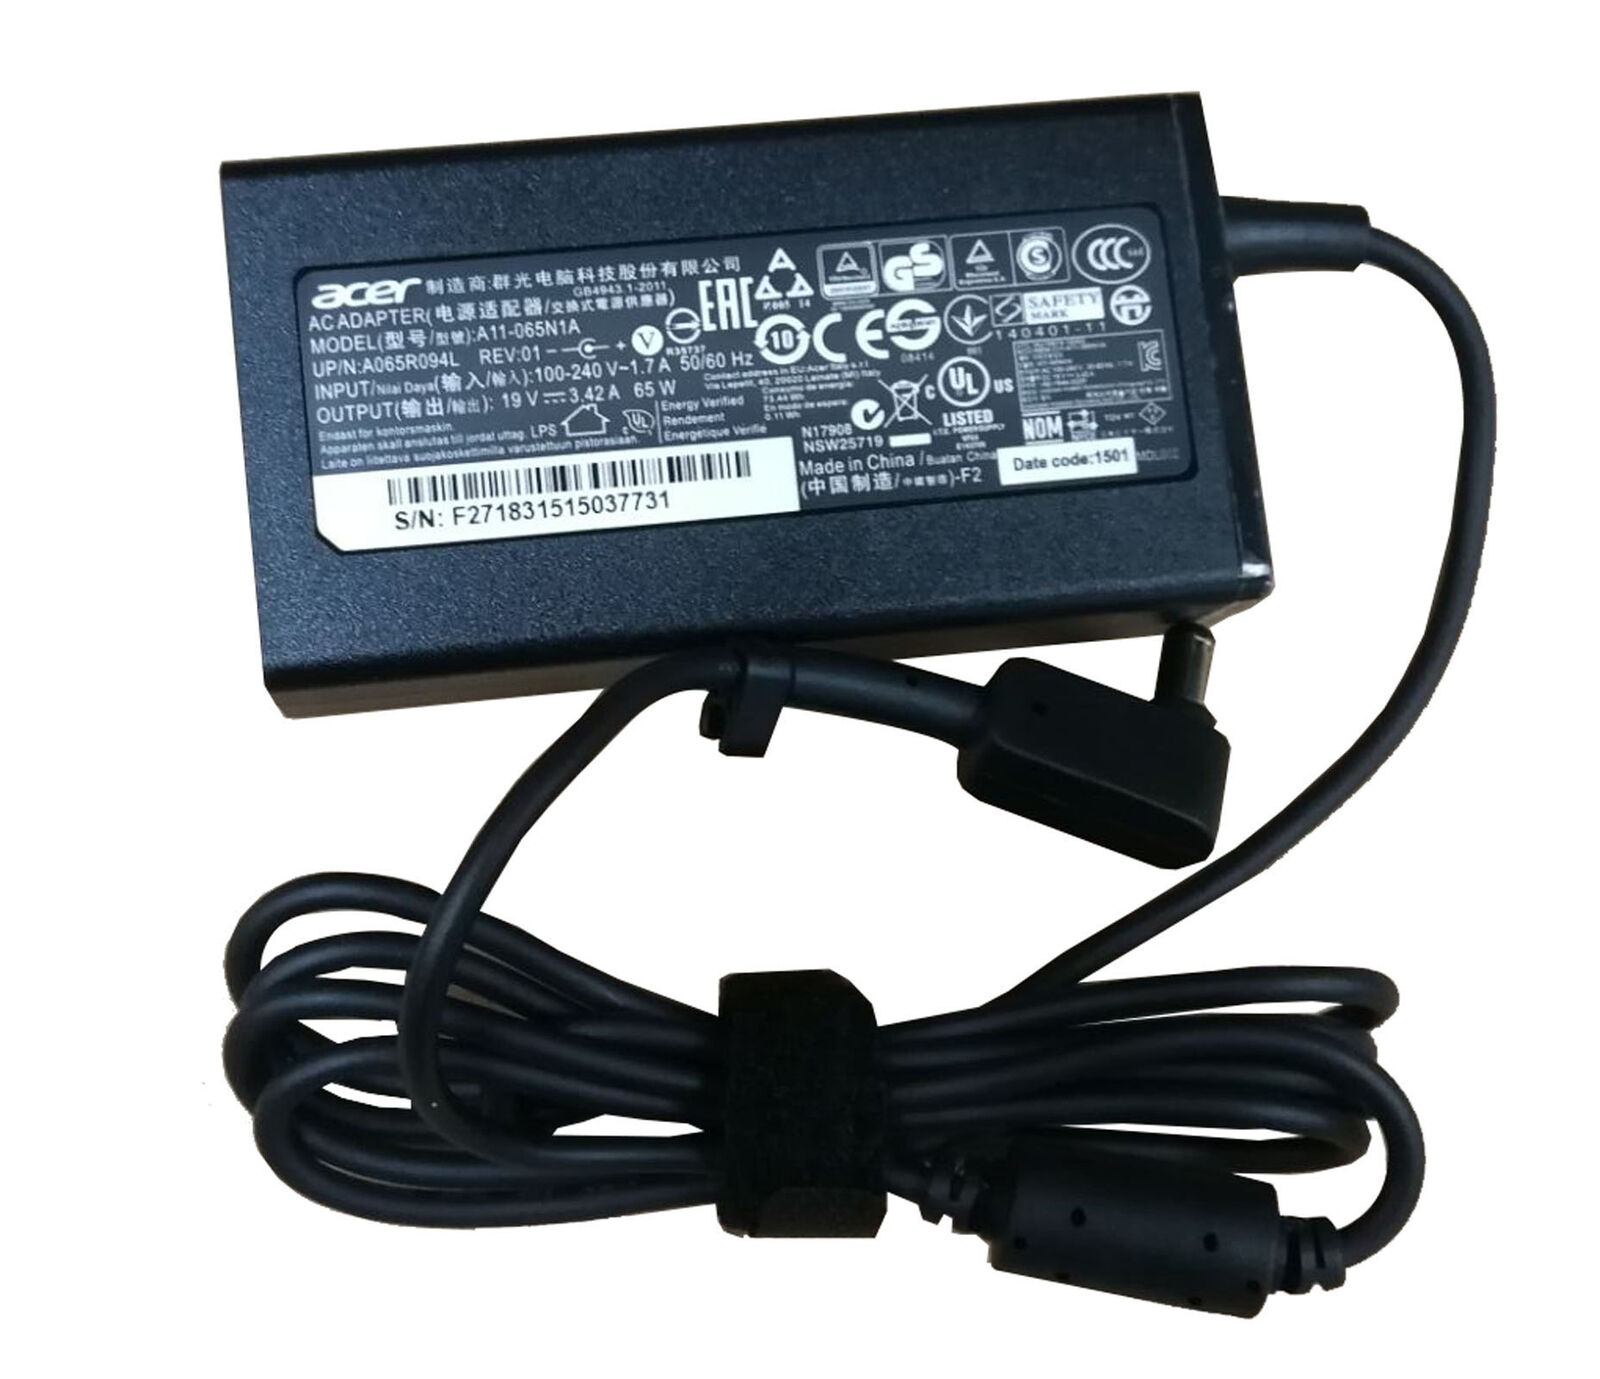 65W Acer Chromebook CB5-571-C5XU Charger AC Adapter Power Cord